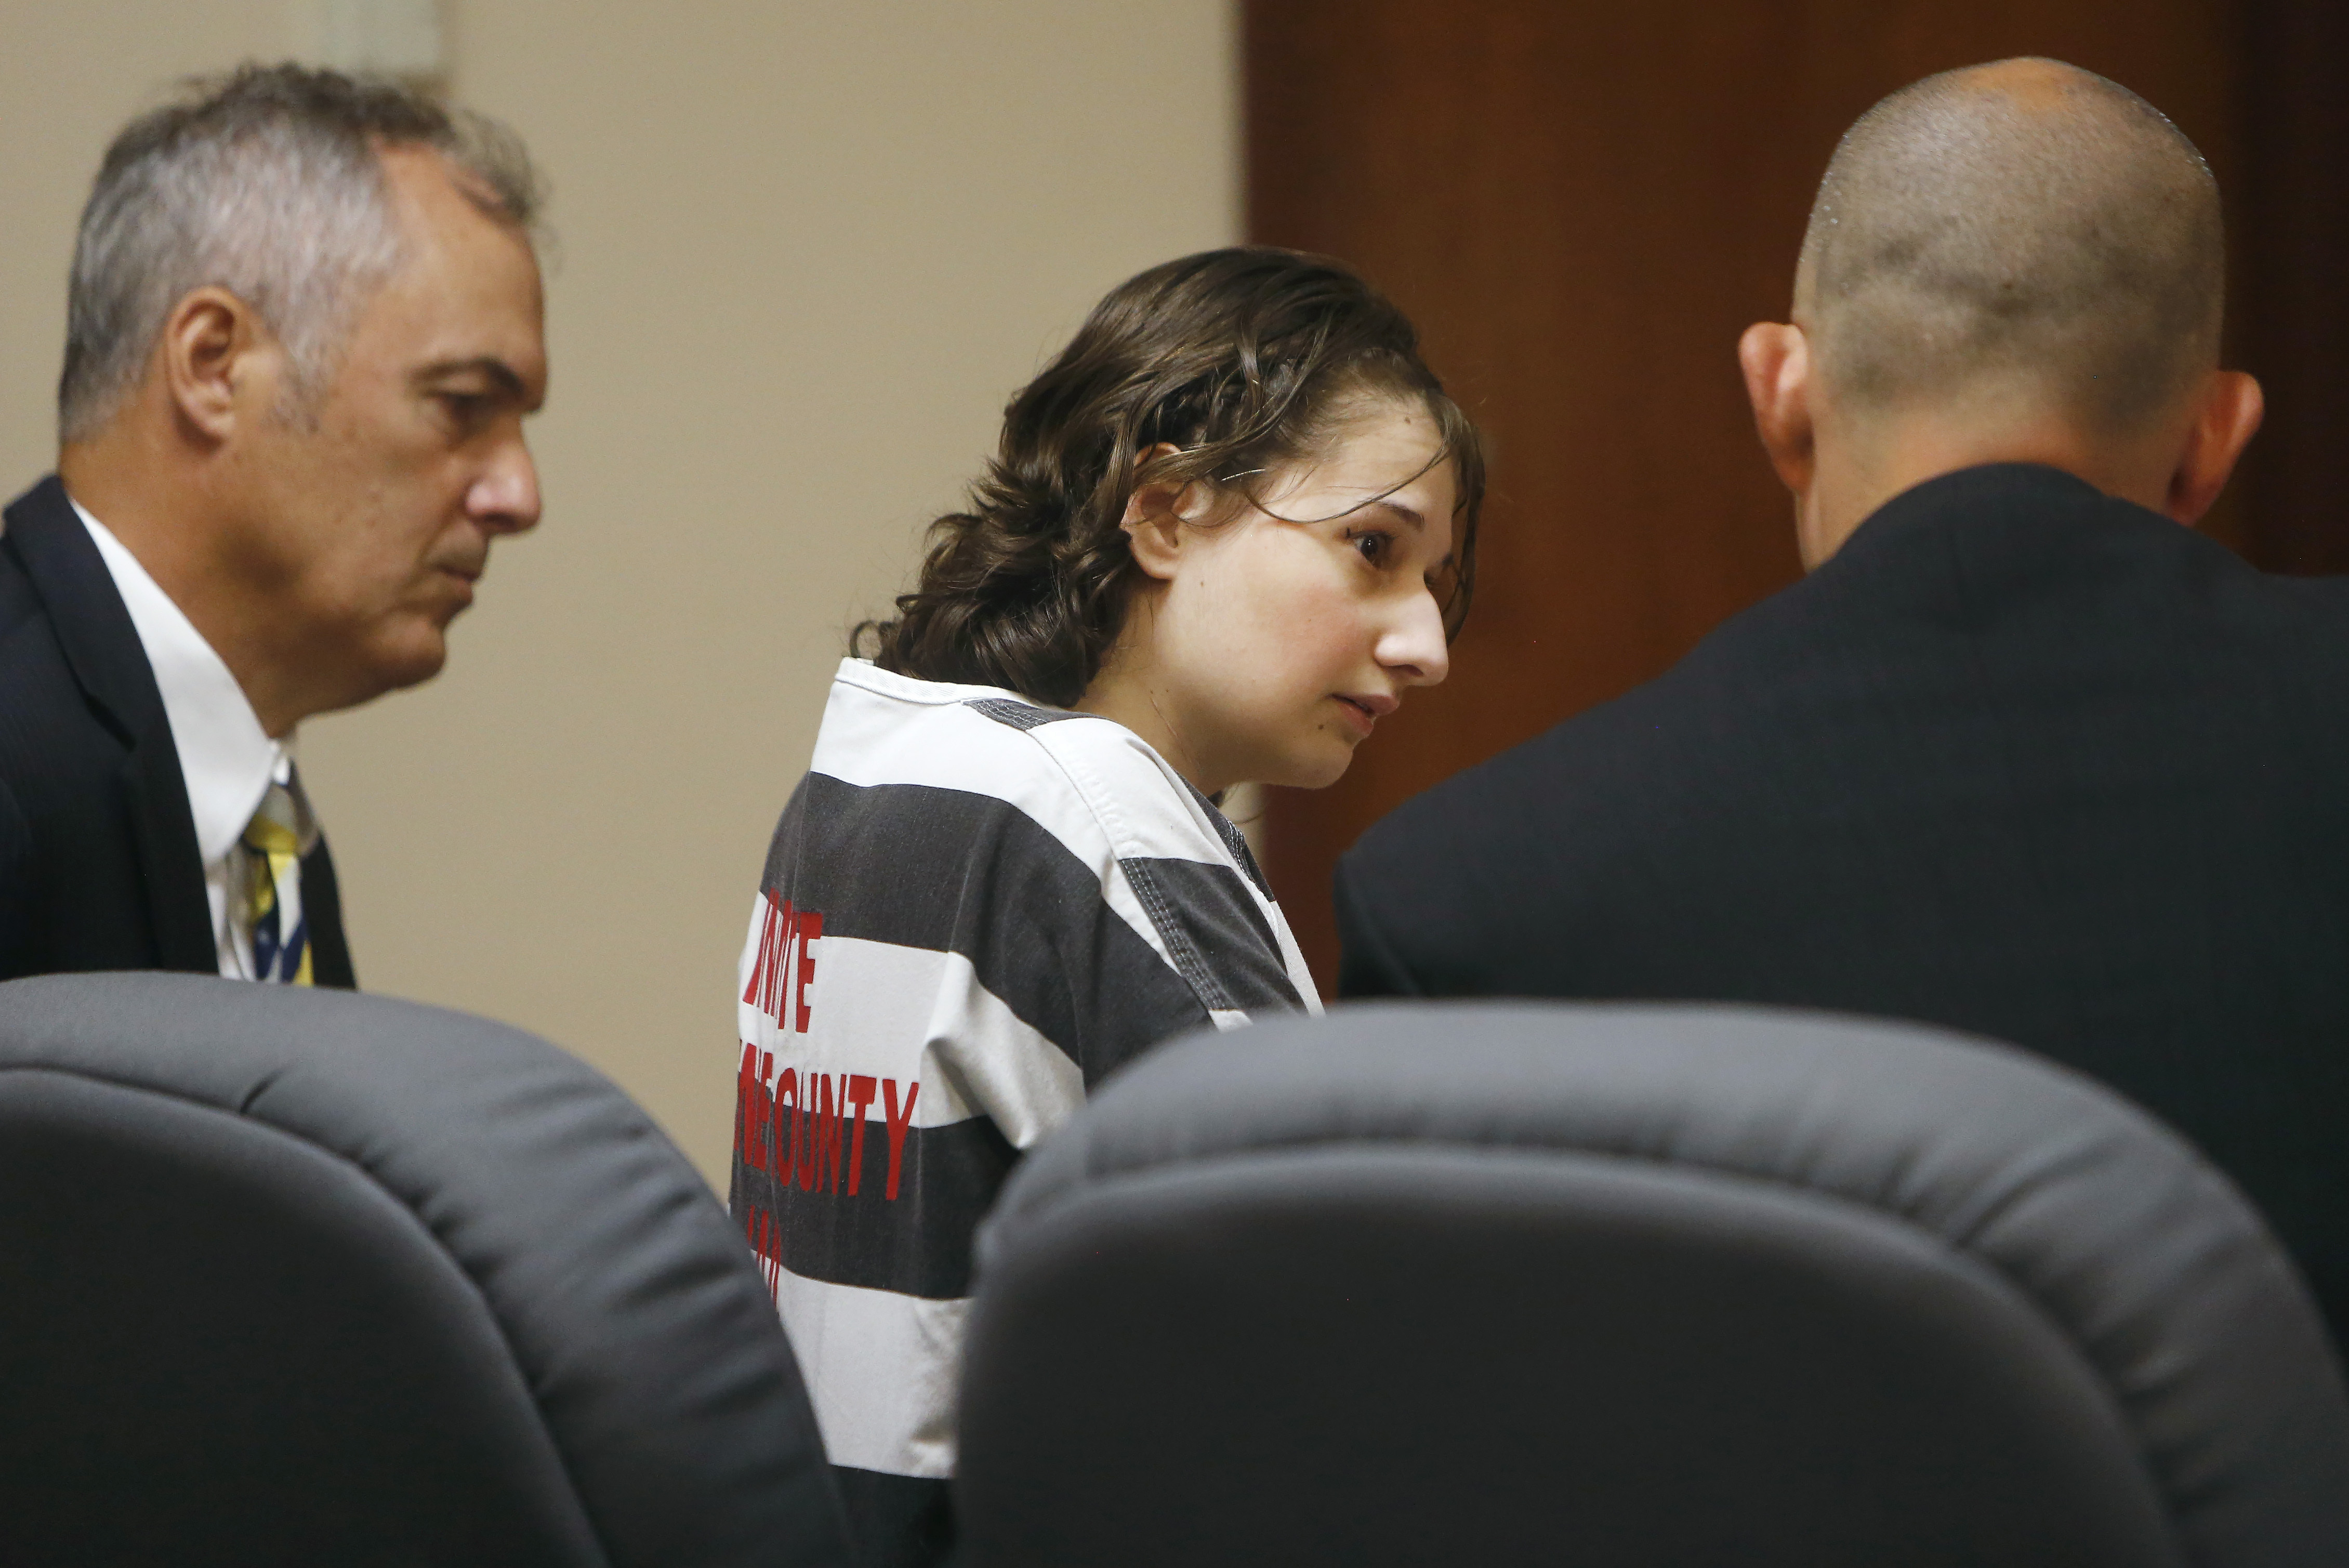 Gypsy Rose Blanchard Consummated Her Marriage Within Hours of Prison Release